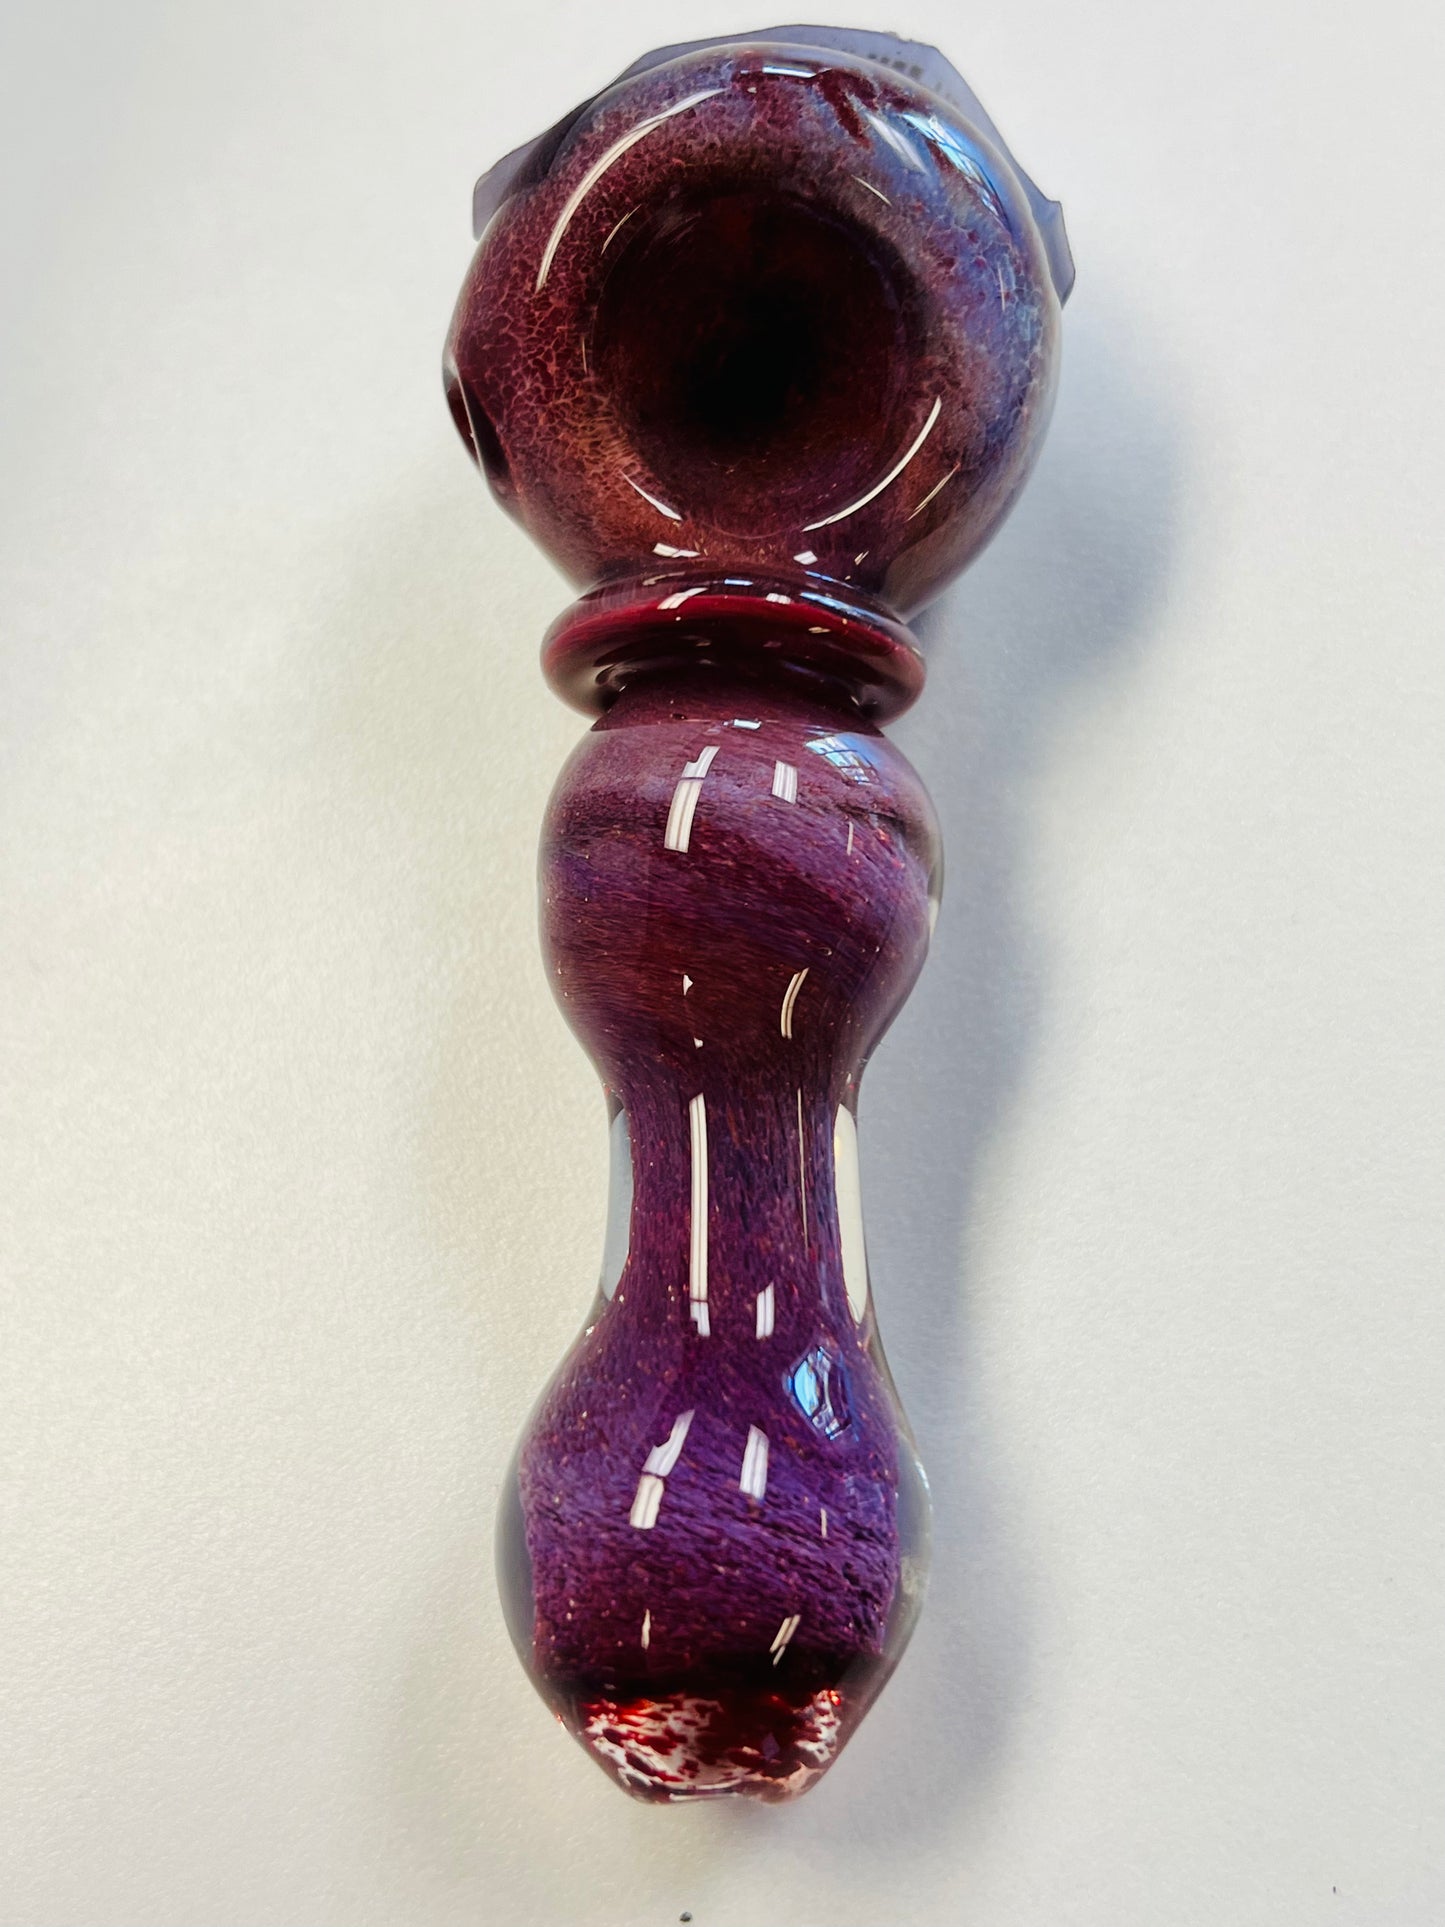 3.5" Red Multicolor Hand Pipe W/ Carb yoga smokes smoke shop, dispensary, local dispensary, smokeshop near me, port st lucie smoke shop, smoke shop in port st lucie, smoke shop in port saint lucie, smoke shop in florida, Yoga Smokes Buy RAW Rolling Papers USA, smoke shop near me, what time does the smoke shop close, smoke shop open near me, 24 hour smoke shop near me